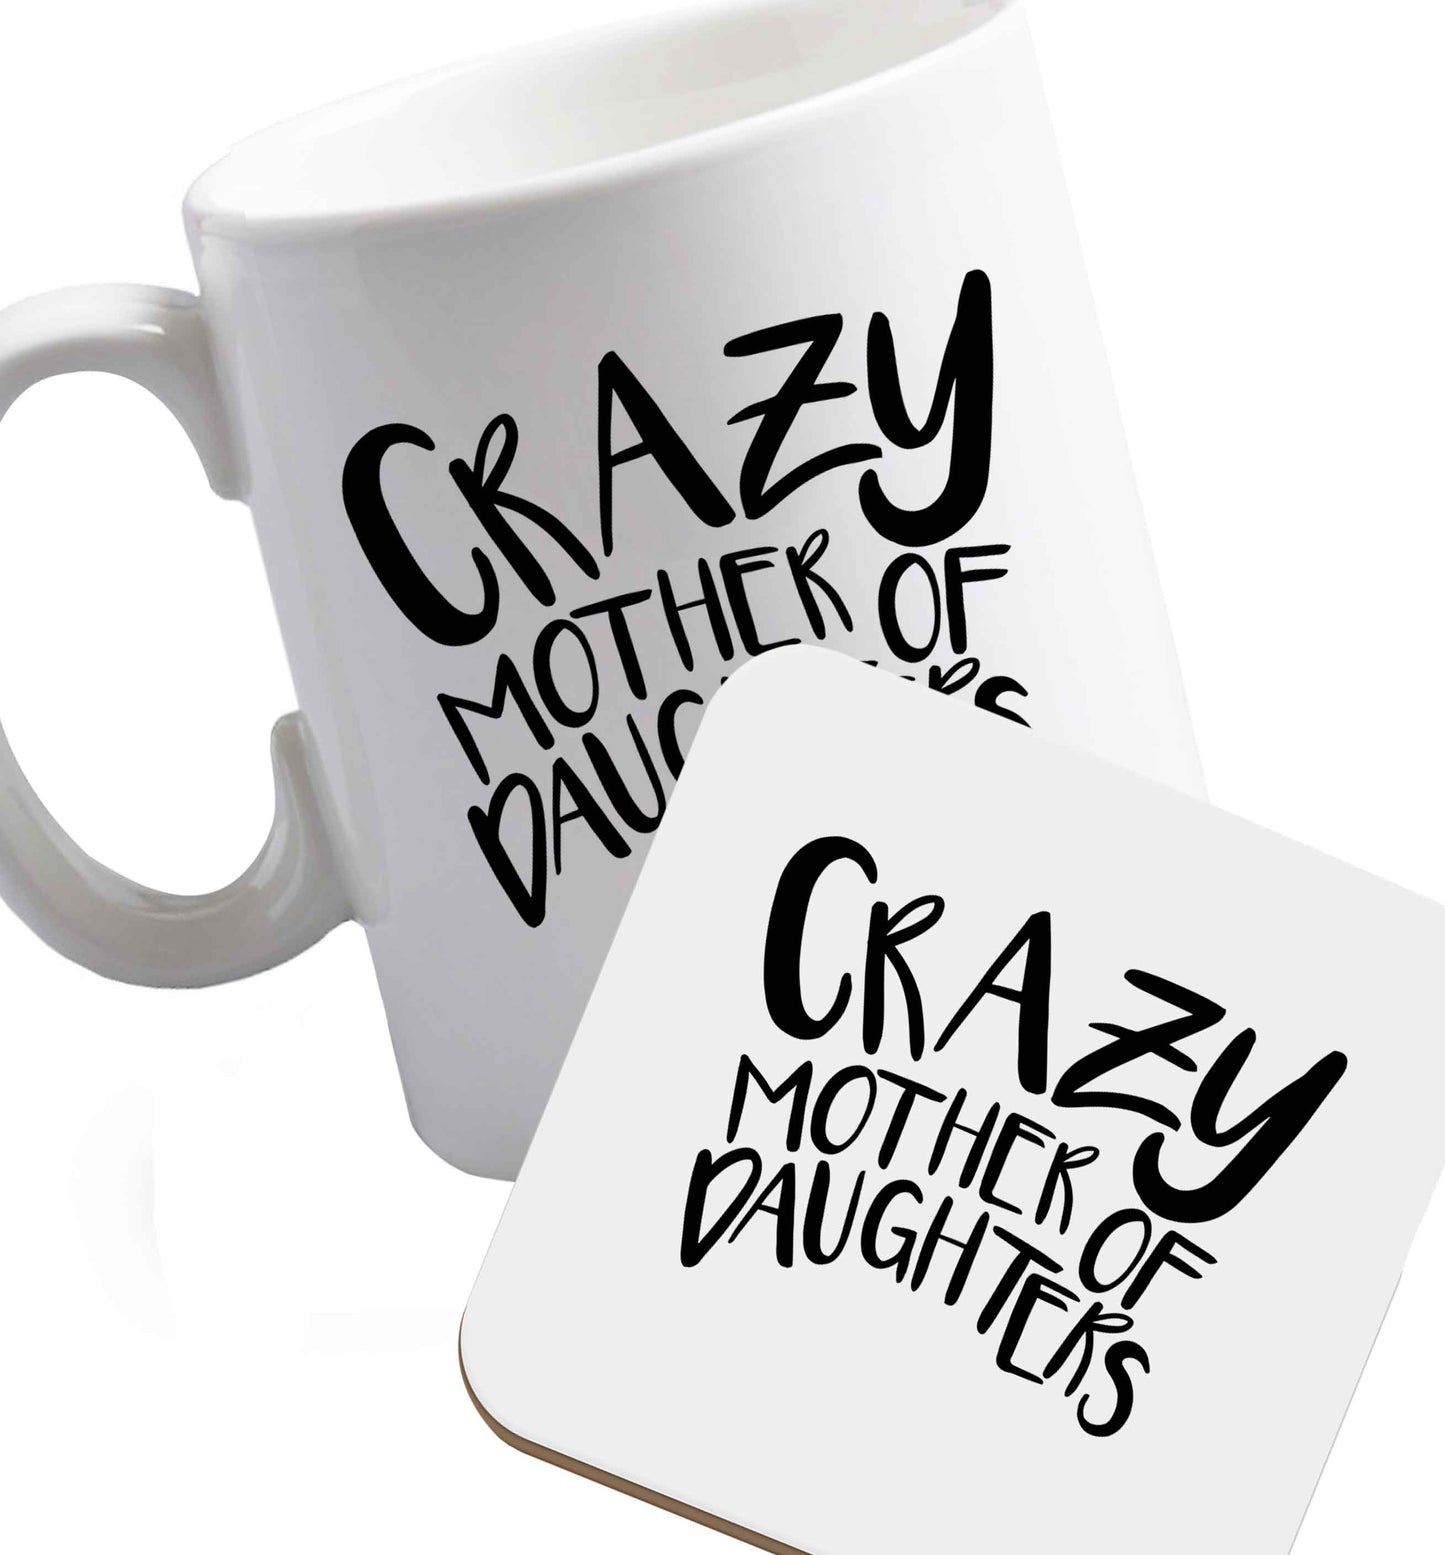 10 oz Crazy mother of daughters ceramic mug and coaster set right handed